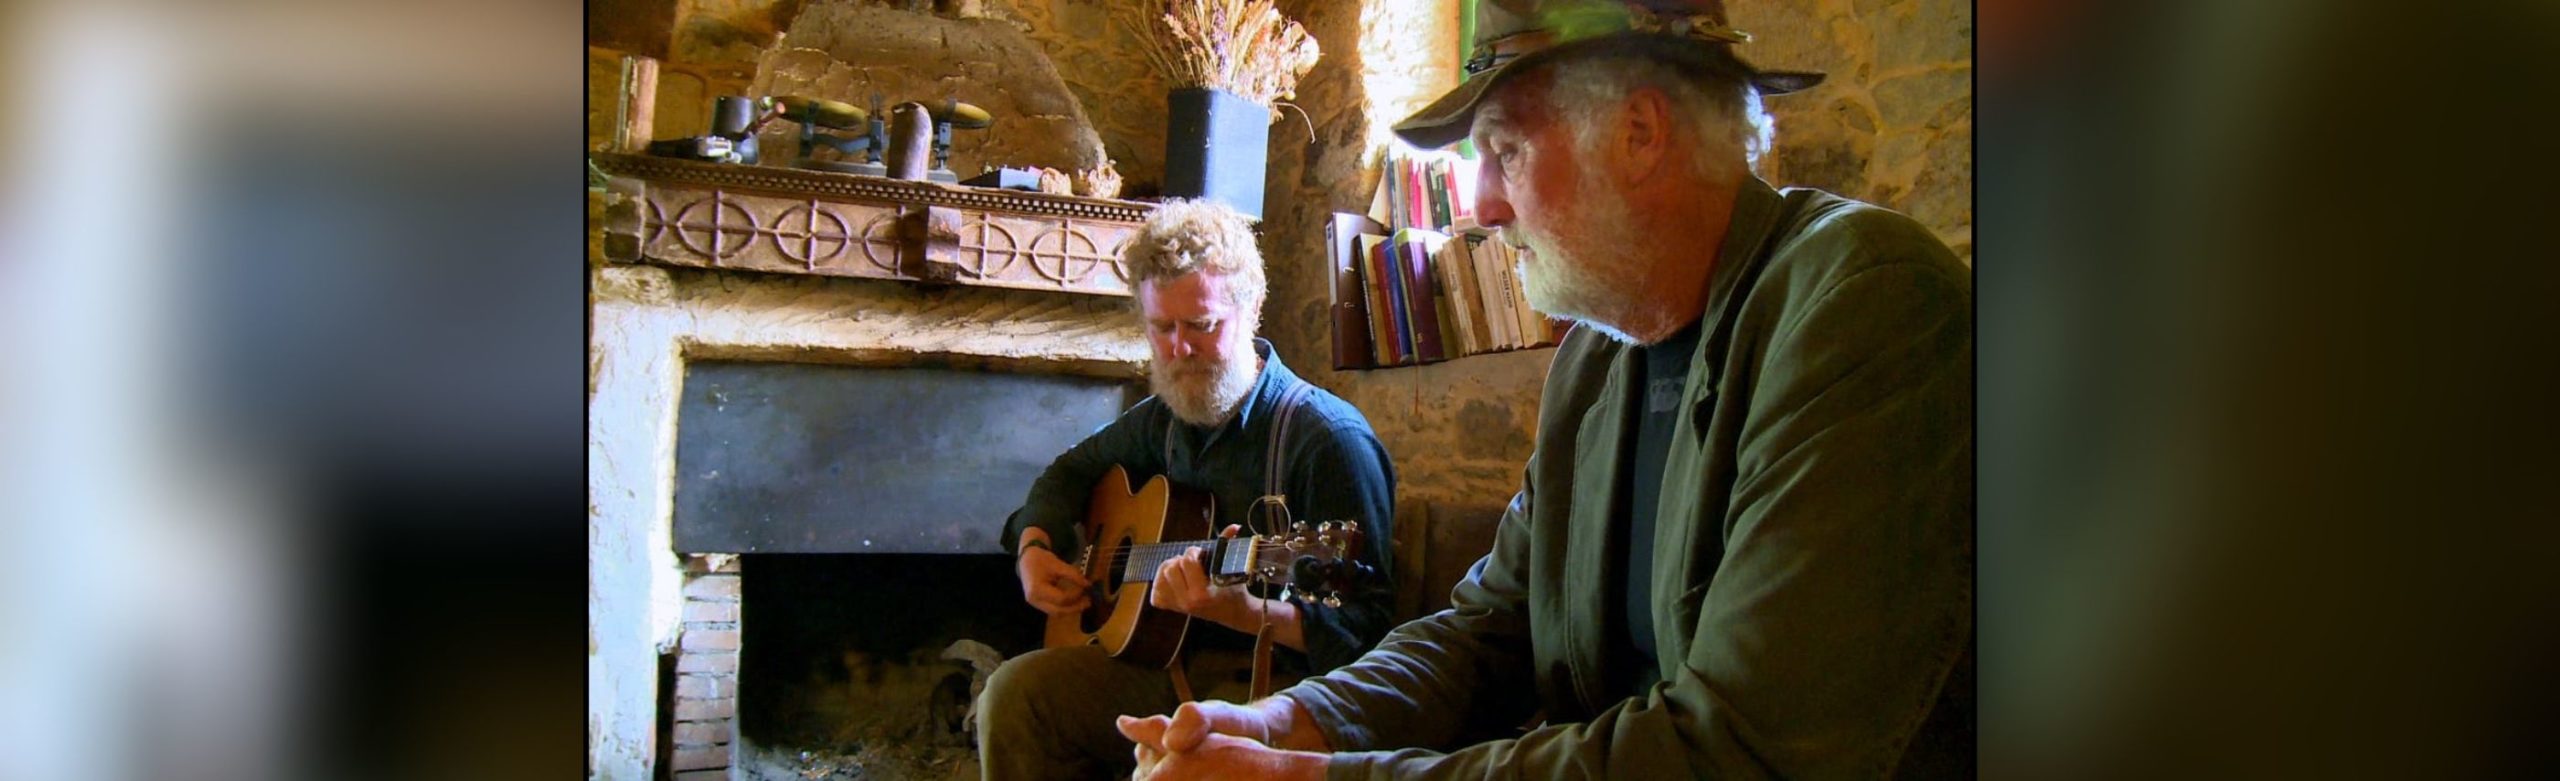 Glen Hansard Performs “Leave A Light” on ‘The Camino Voyage’ Image